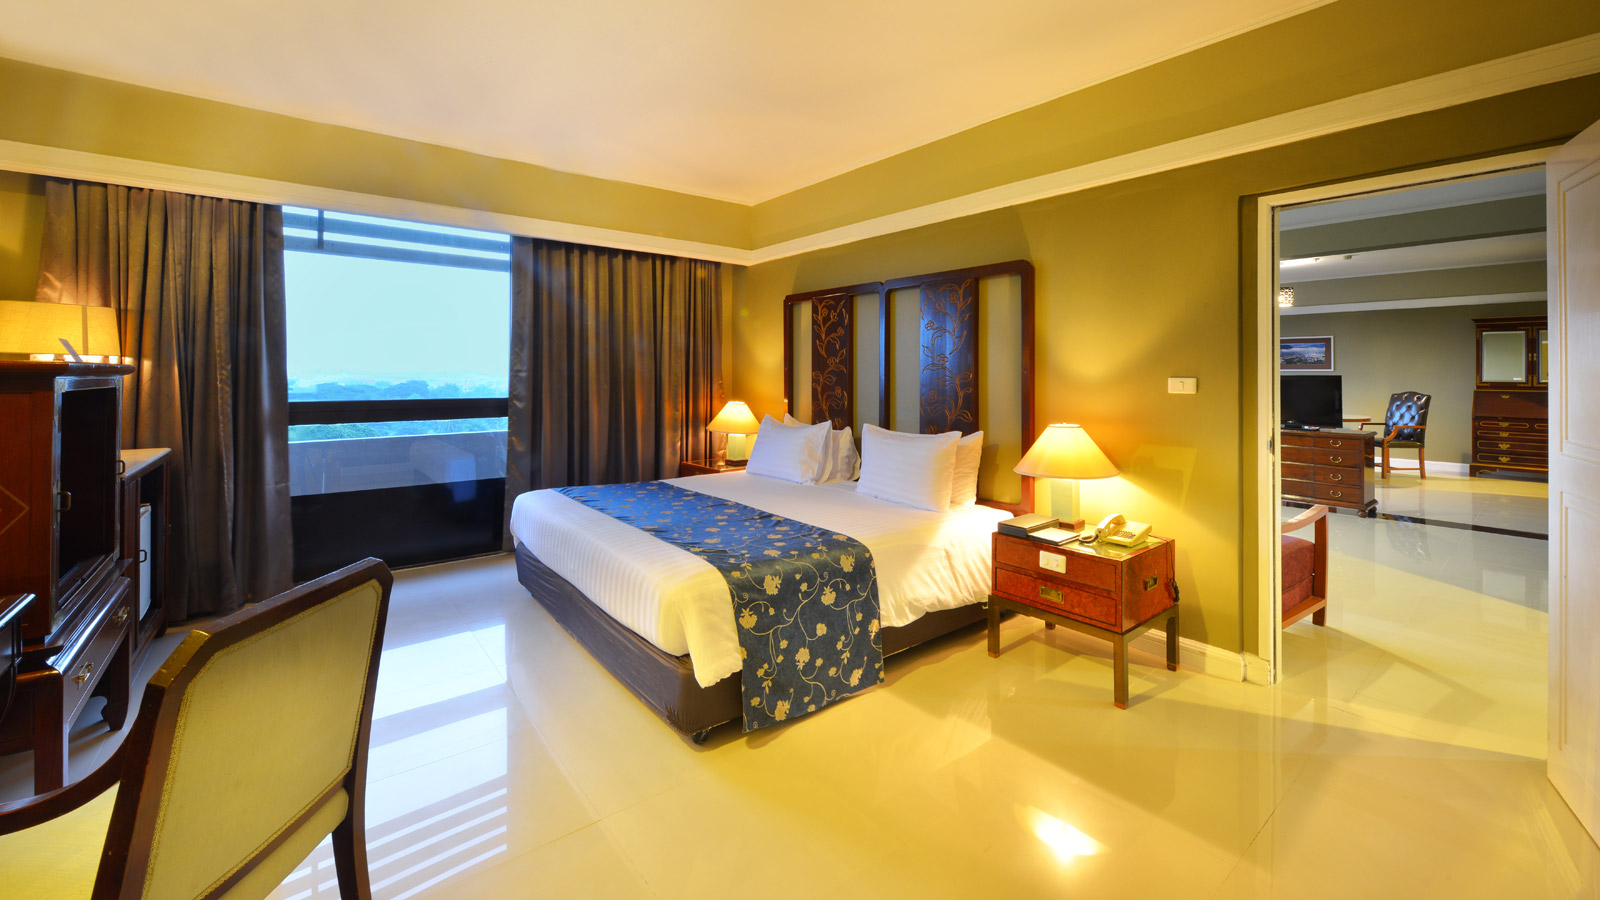 Executive Suites at Loei Palace Hotel - 黎府宫殿酒店